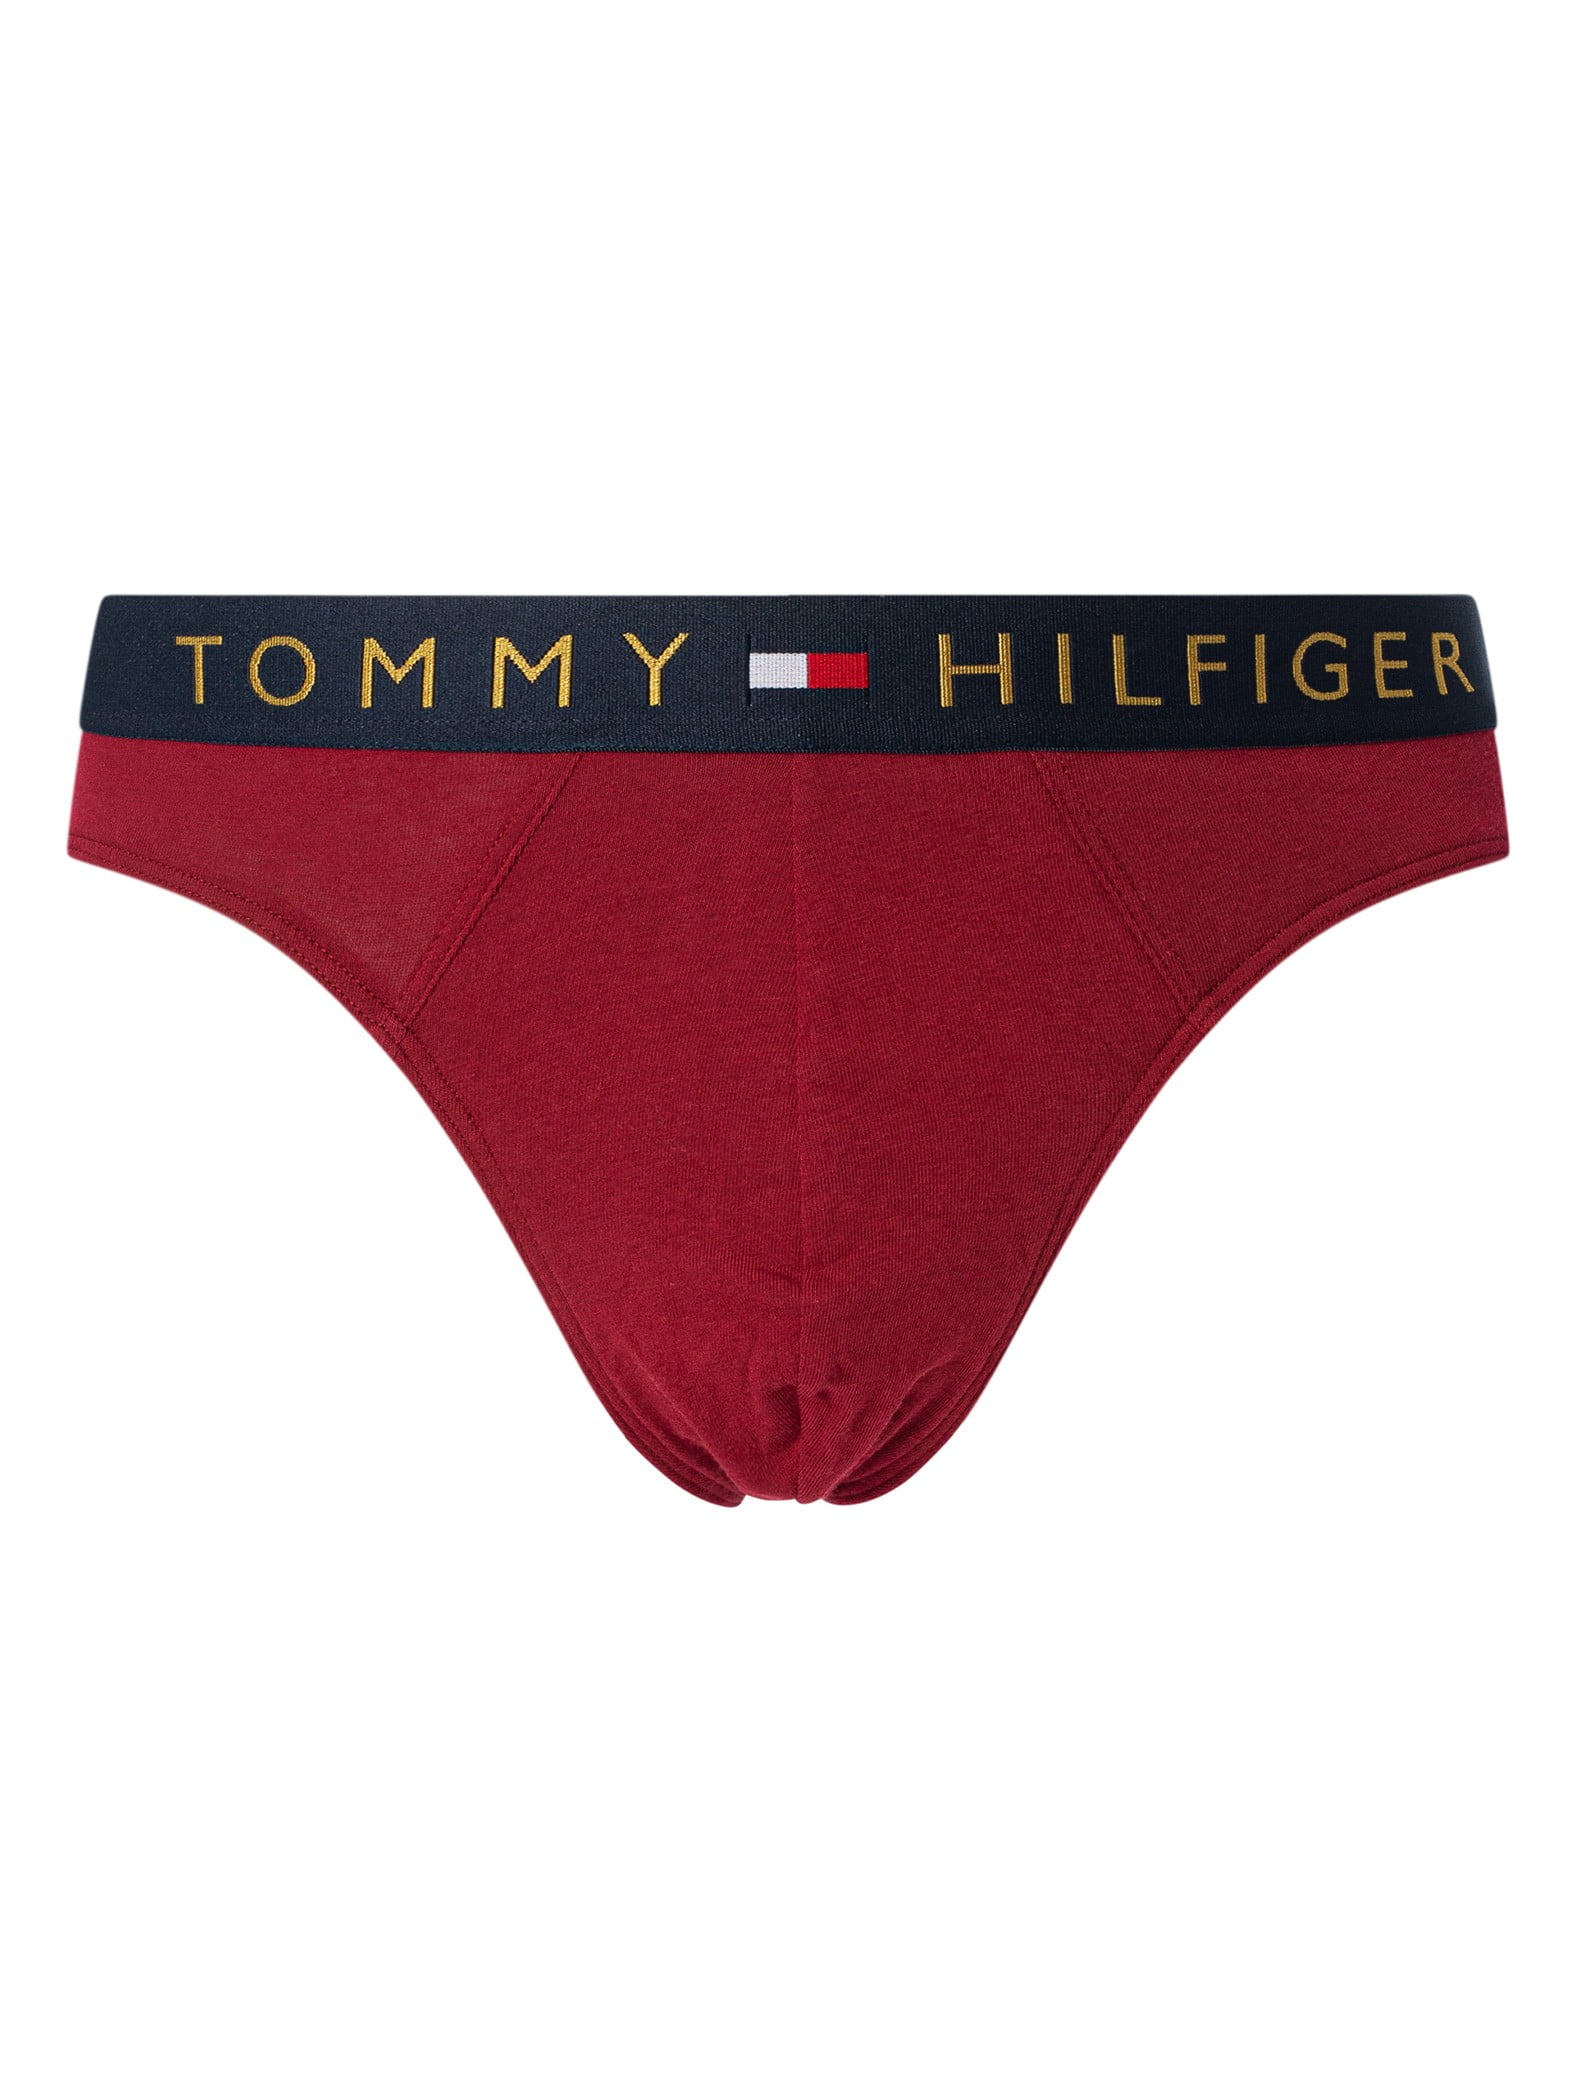 Tommy Hilfiger 5 Pack Gold Briefs, WB Multicoloured